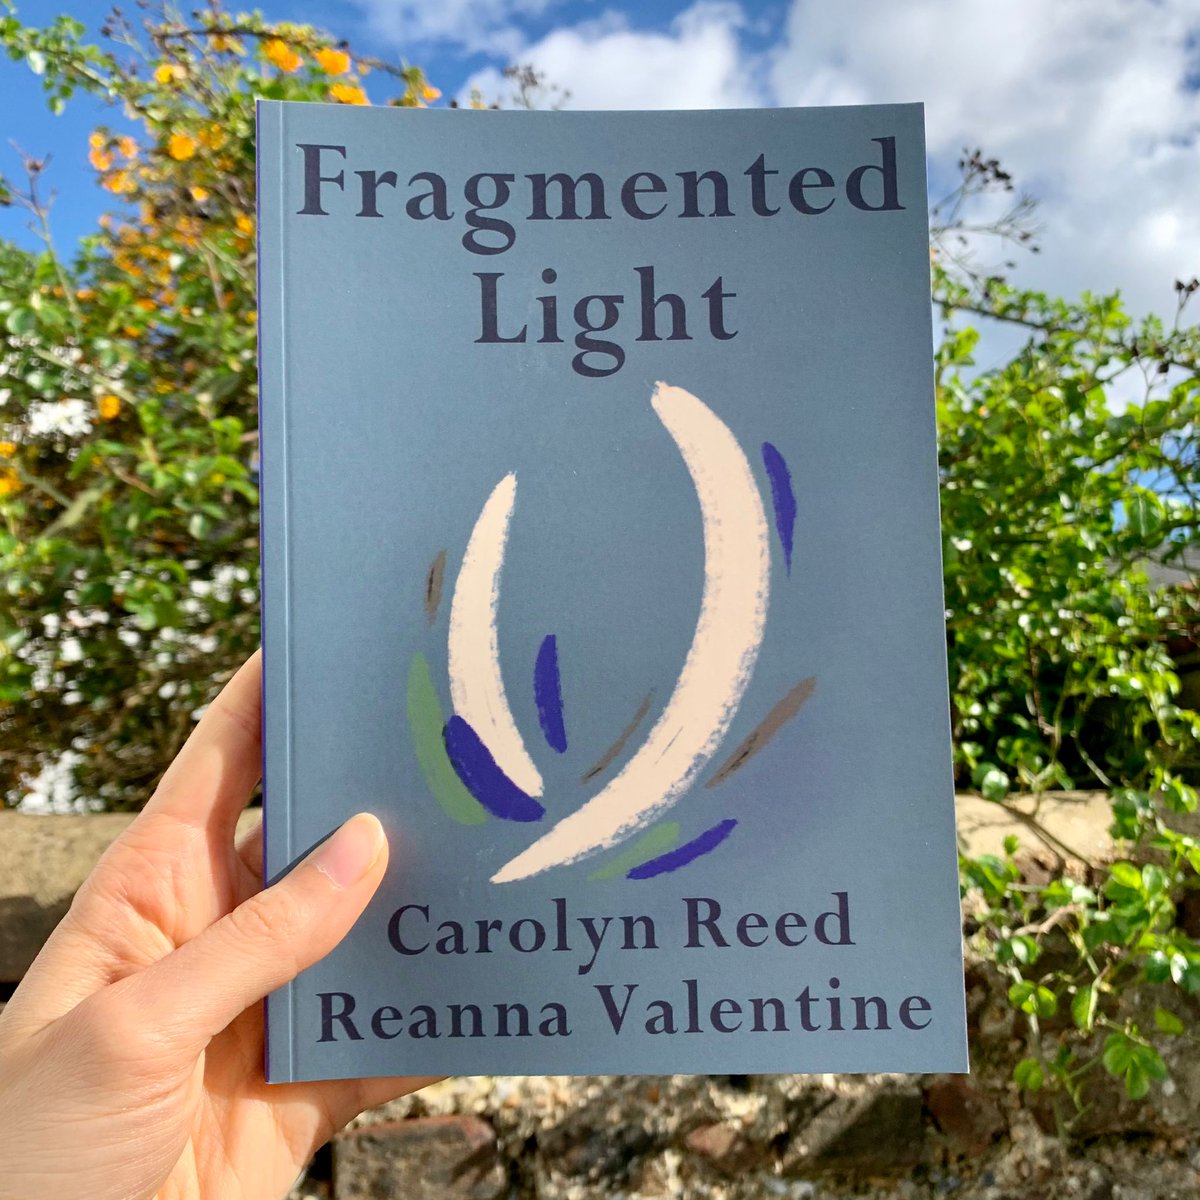 Today, we wanted to welcome spring with 'Leaf', a delicate poem about new life and childlike wonder at the little things of nature. It is the opening poem of 'Fragmented Life', @reannavalentine's intergenerational collaboration with their grandma Carolyn Reed. Happy Reading ✨